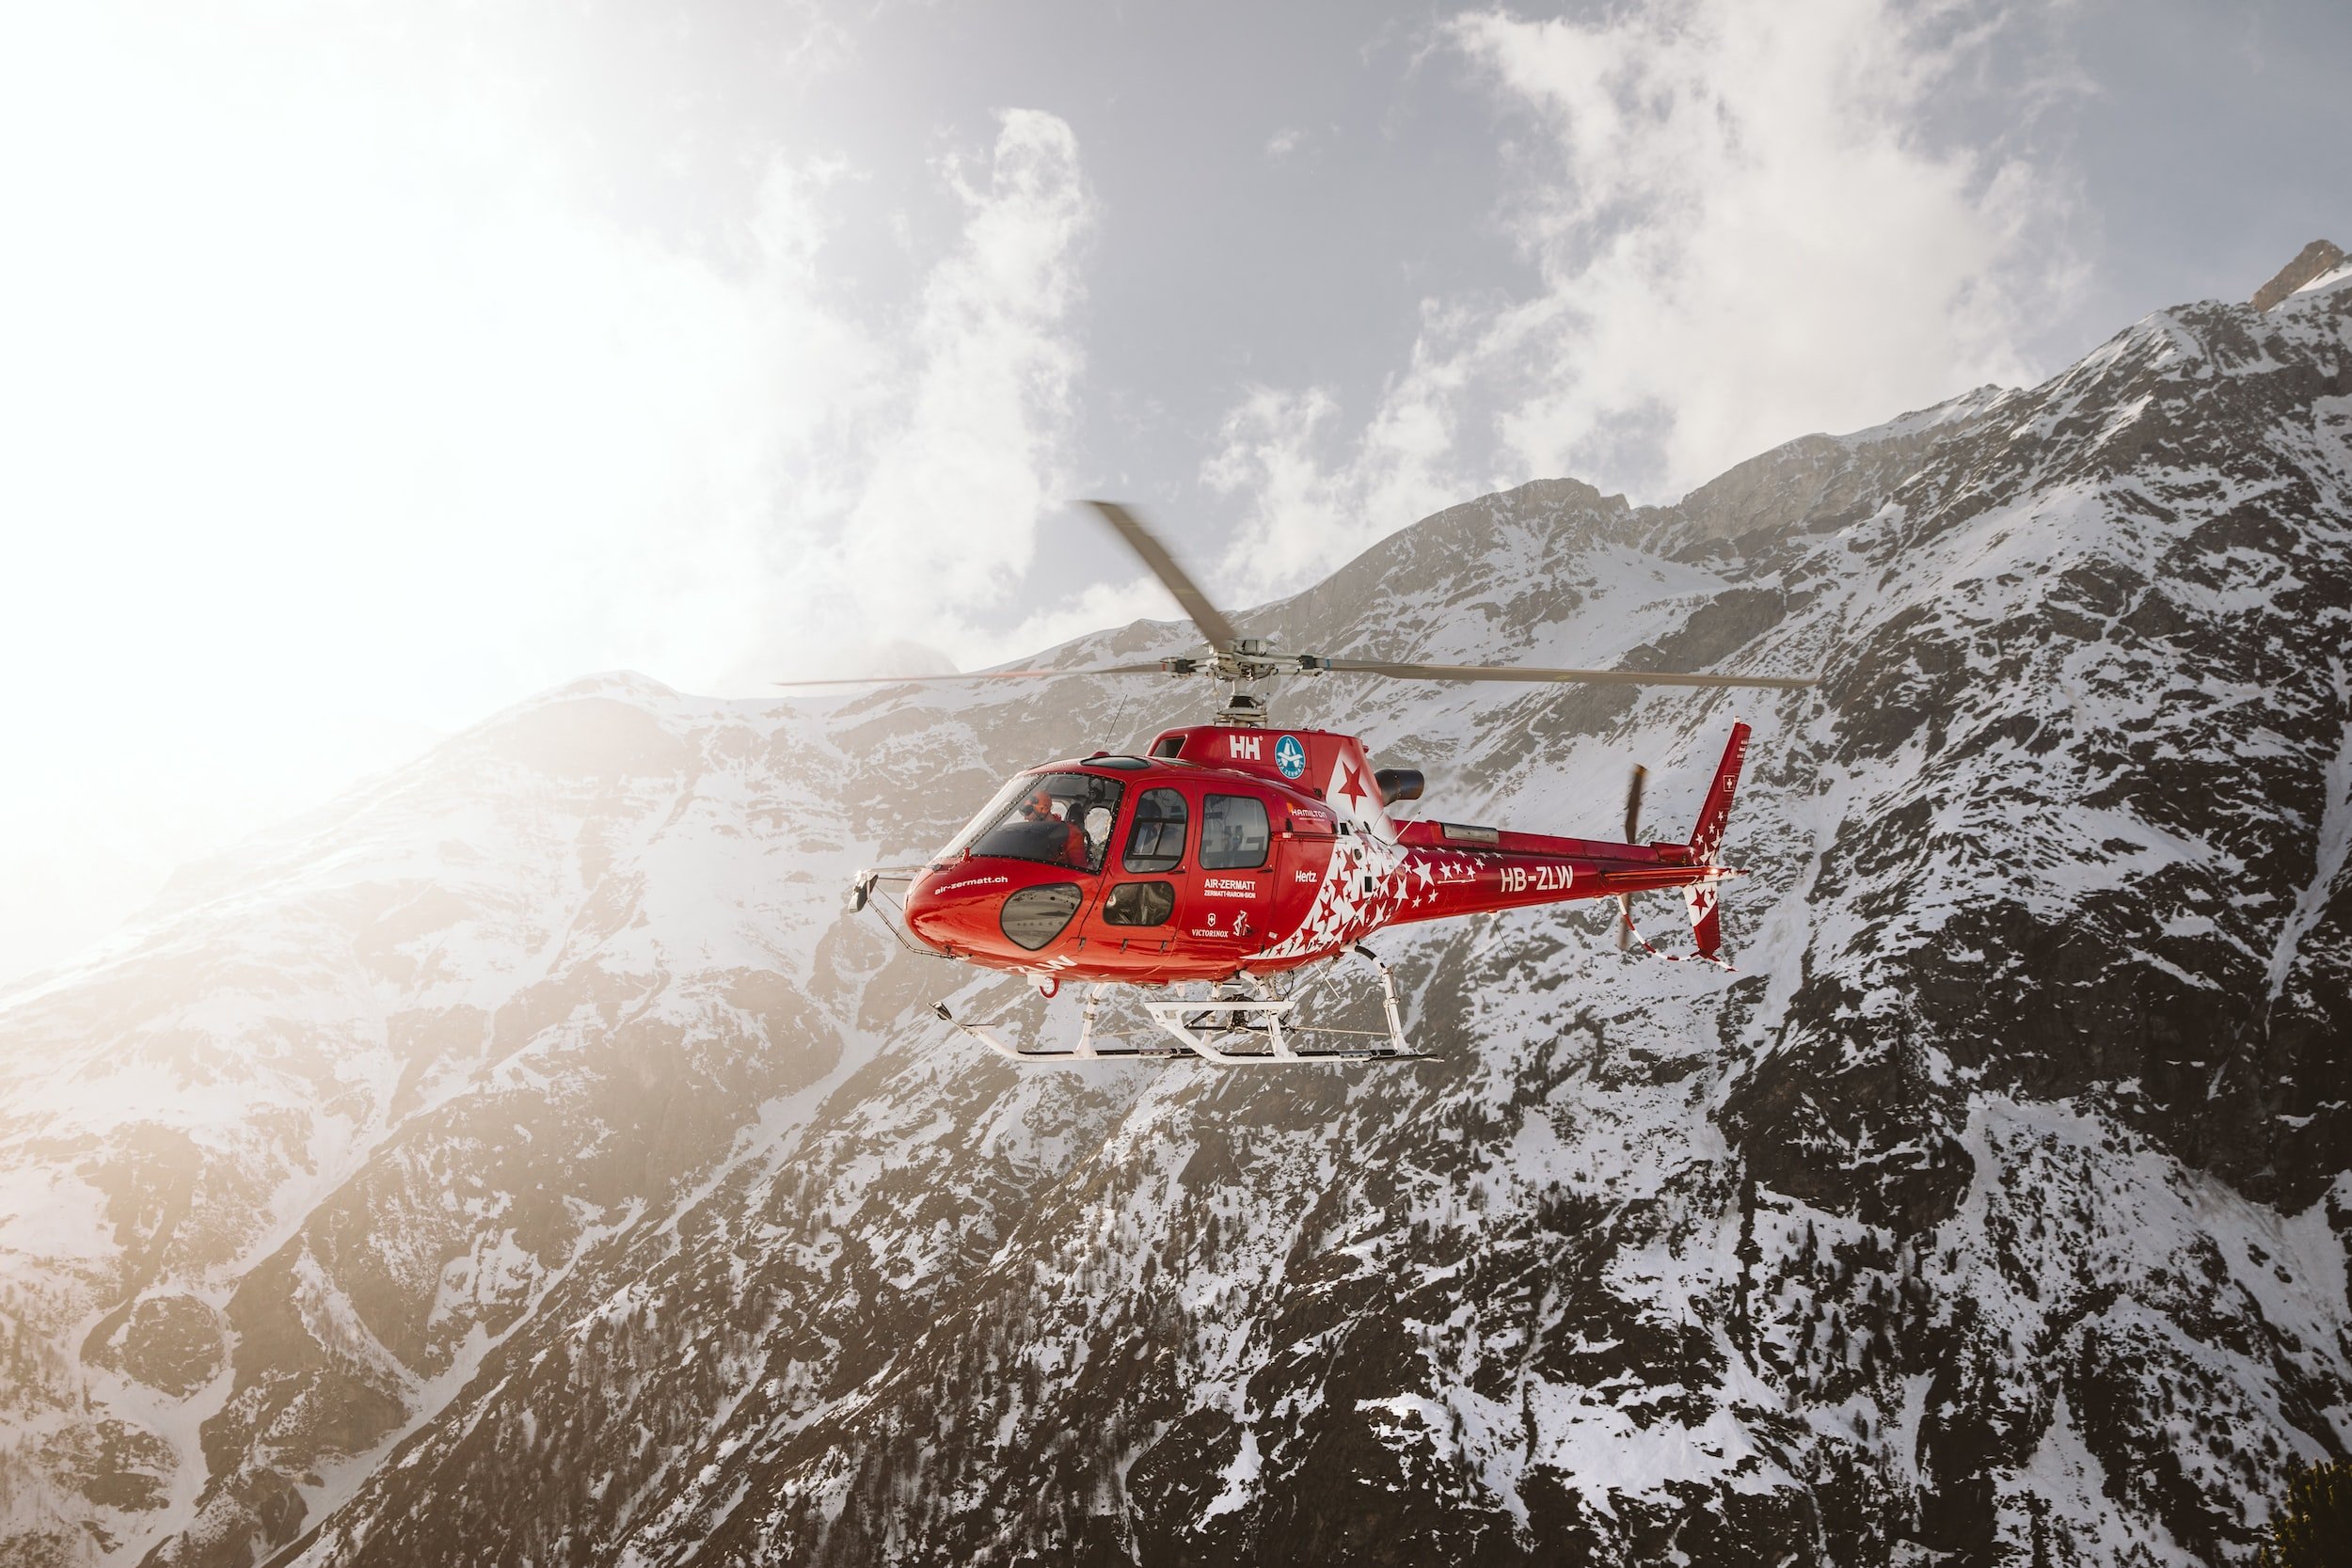 Take a helicopter ride over Mont Blanc in the Alps